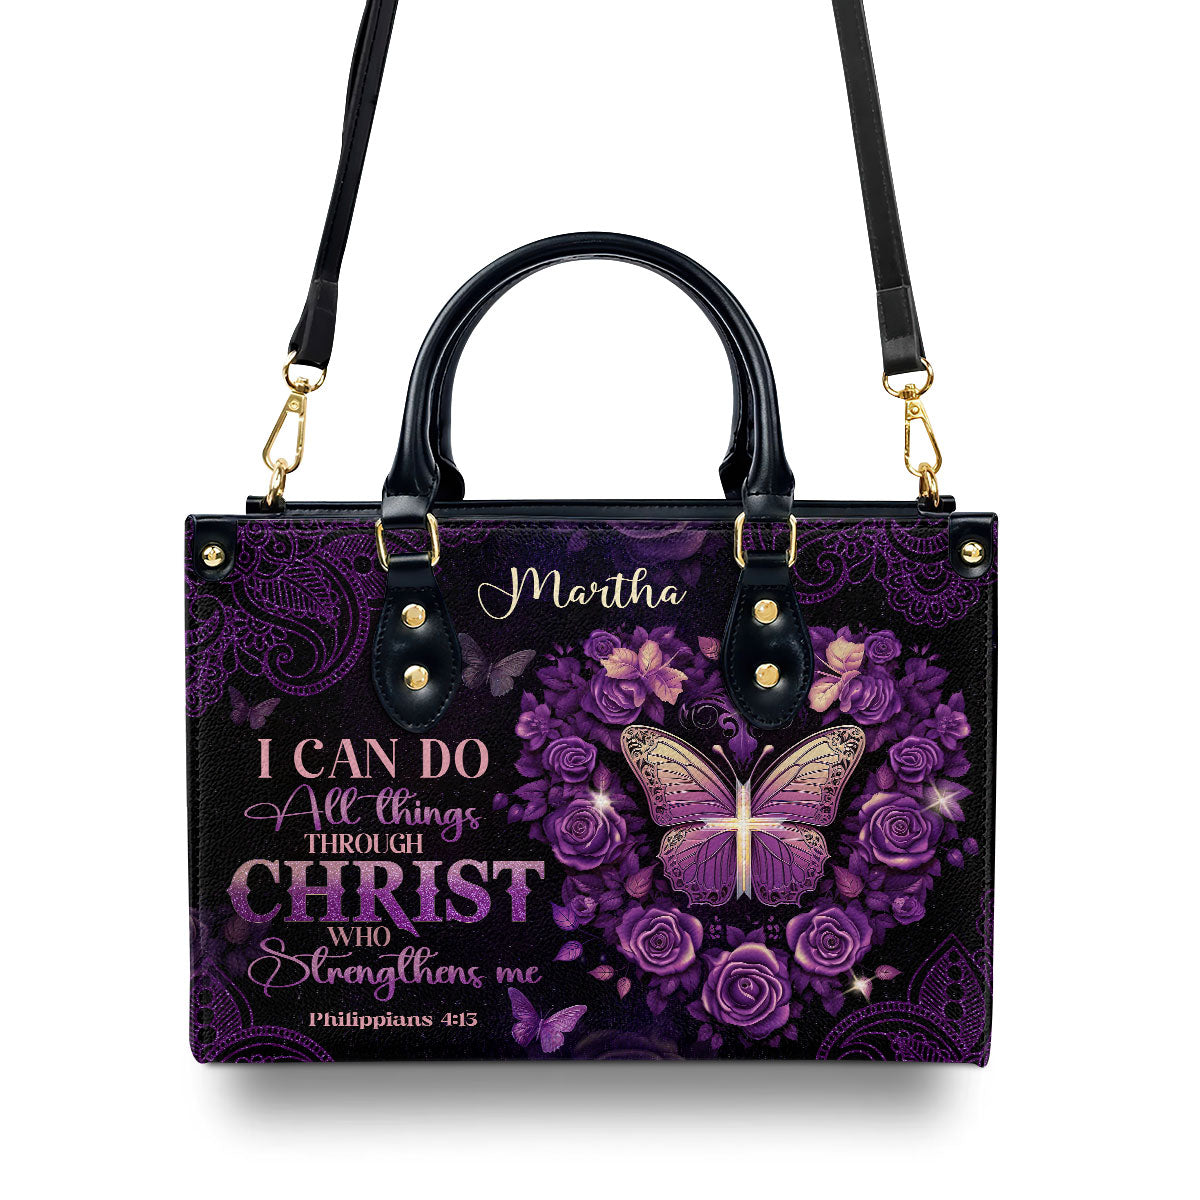 I Can Do All Things  Personalized Leather Handbag With Zipper - Inspirational Gift Christian Ladies